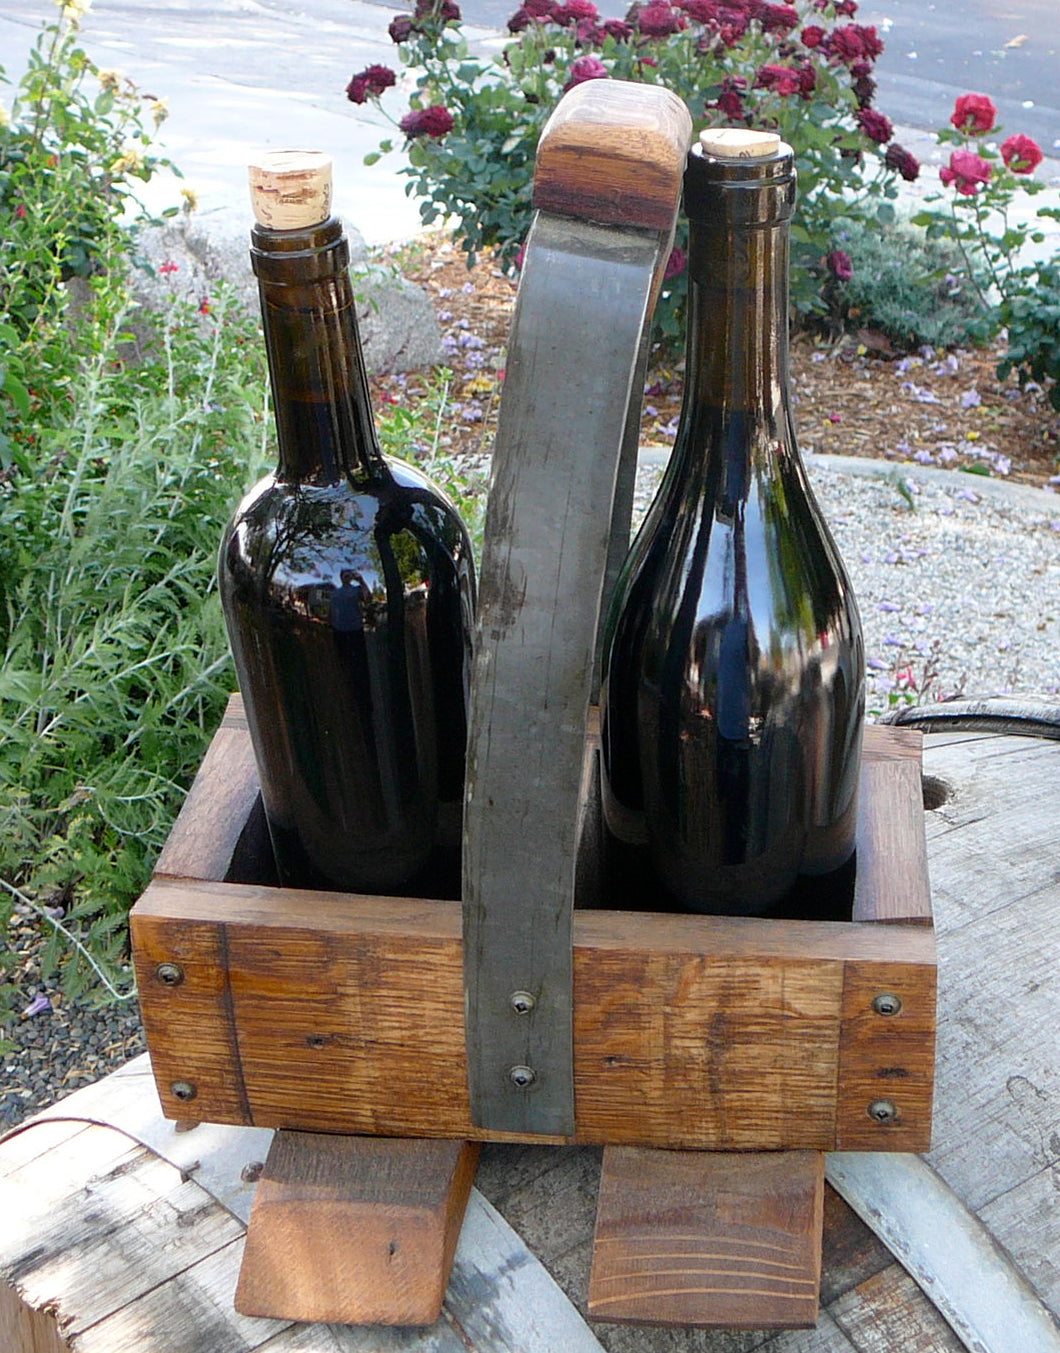 2 bottle carrier made from wine barrel staves